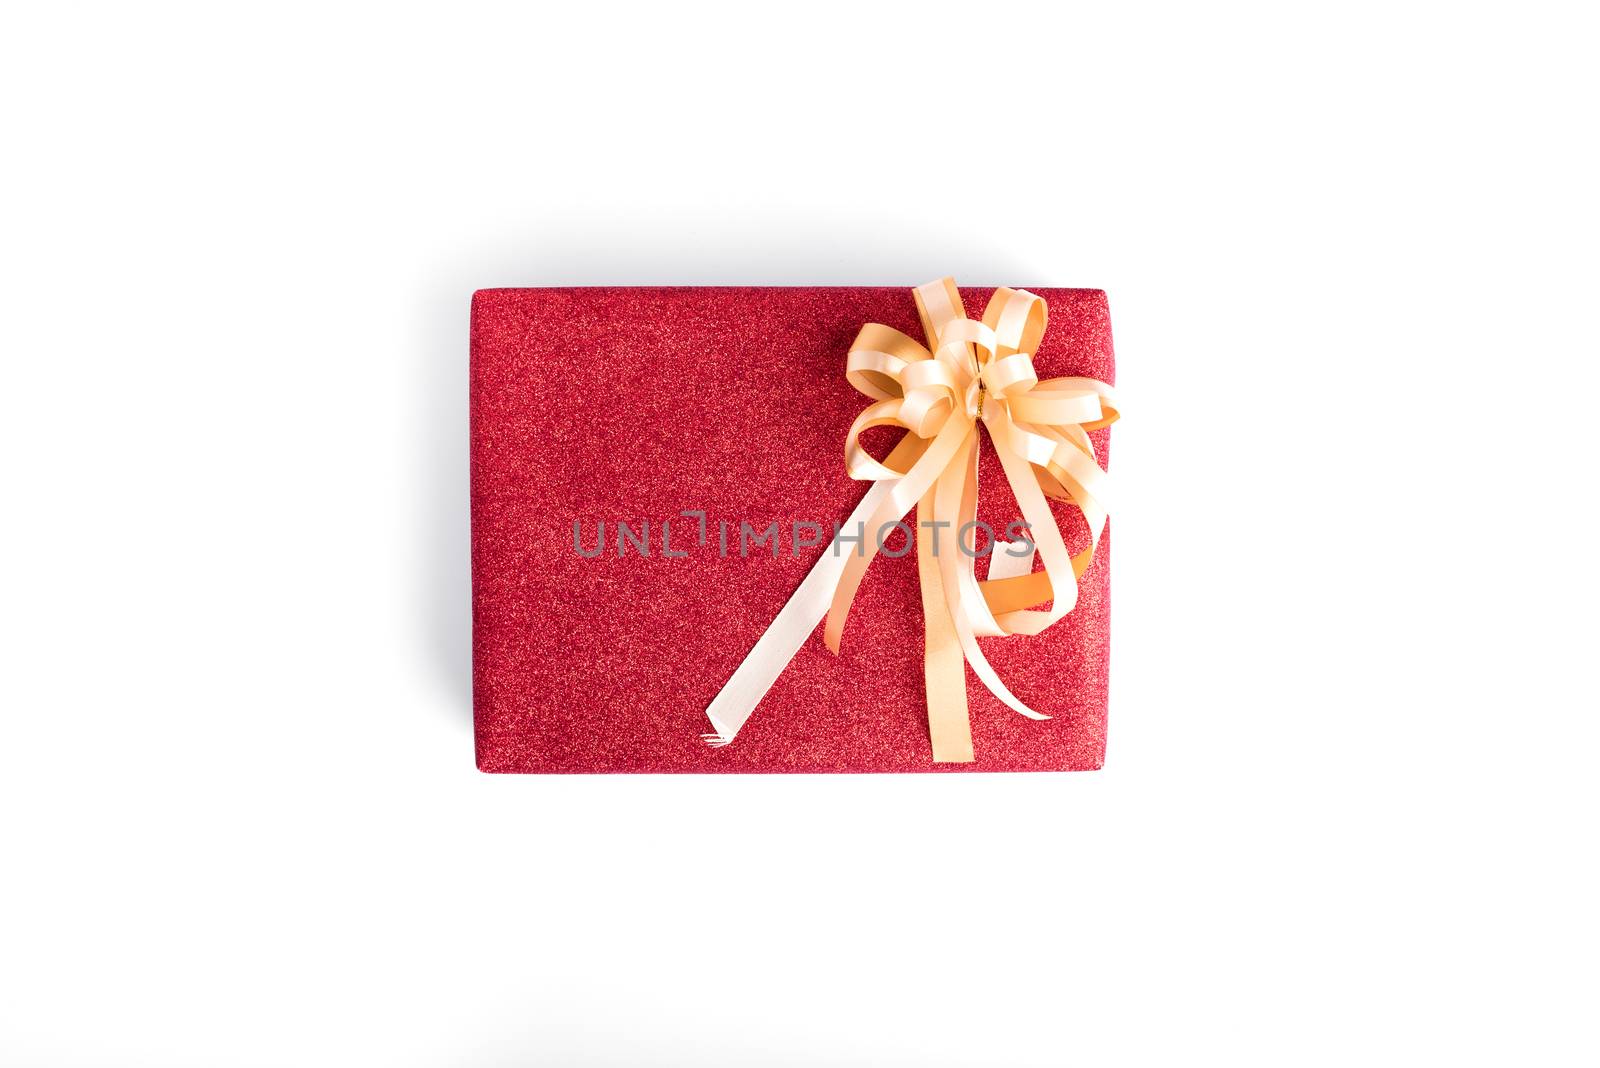 The Christmas present with red glitter gift wrapping and gold ribbon isolated on white background.